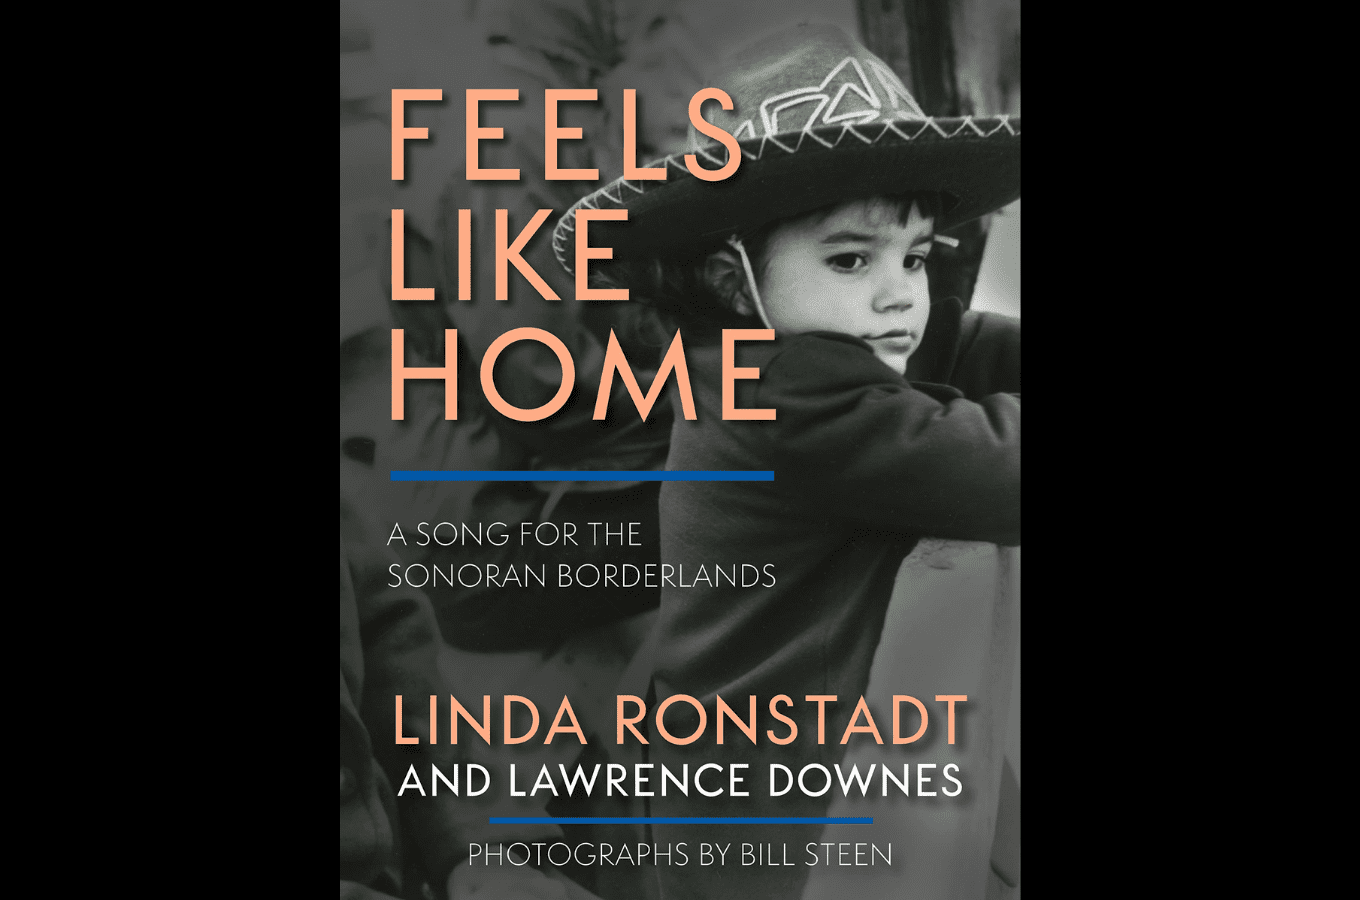 Linda Ronstadt as a child on the cover of her new book "Feels Like Home"